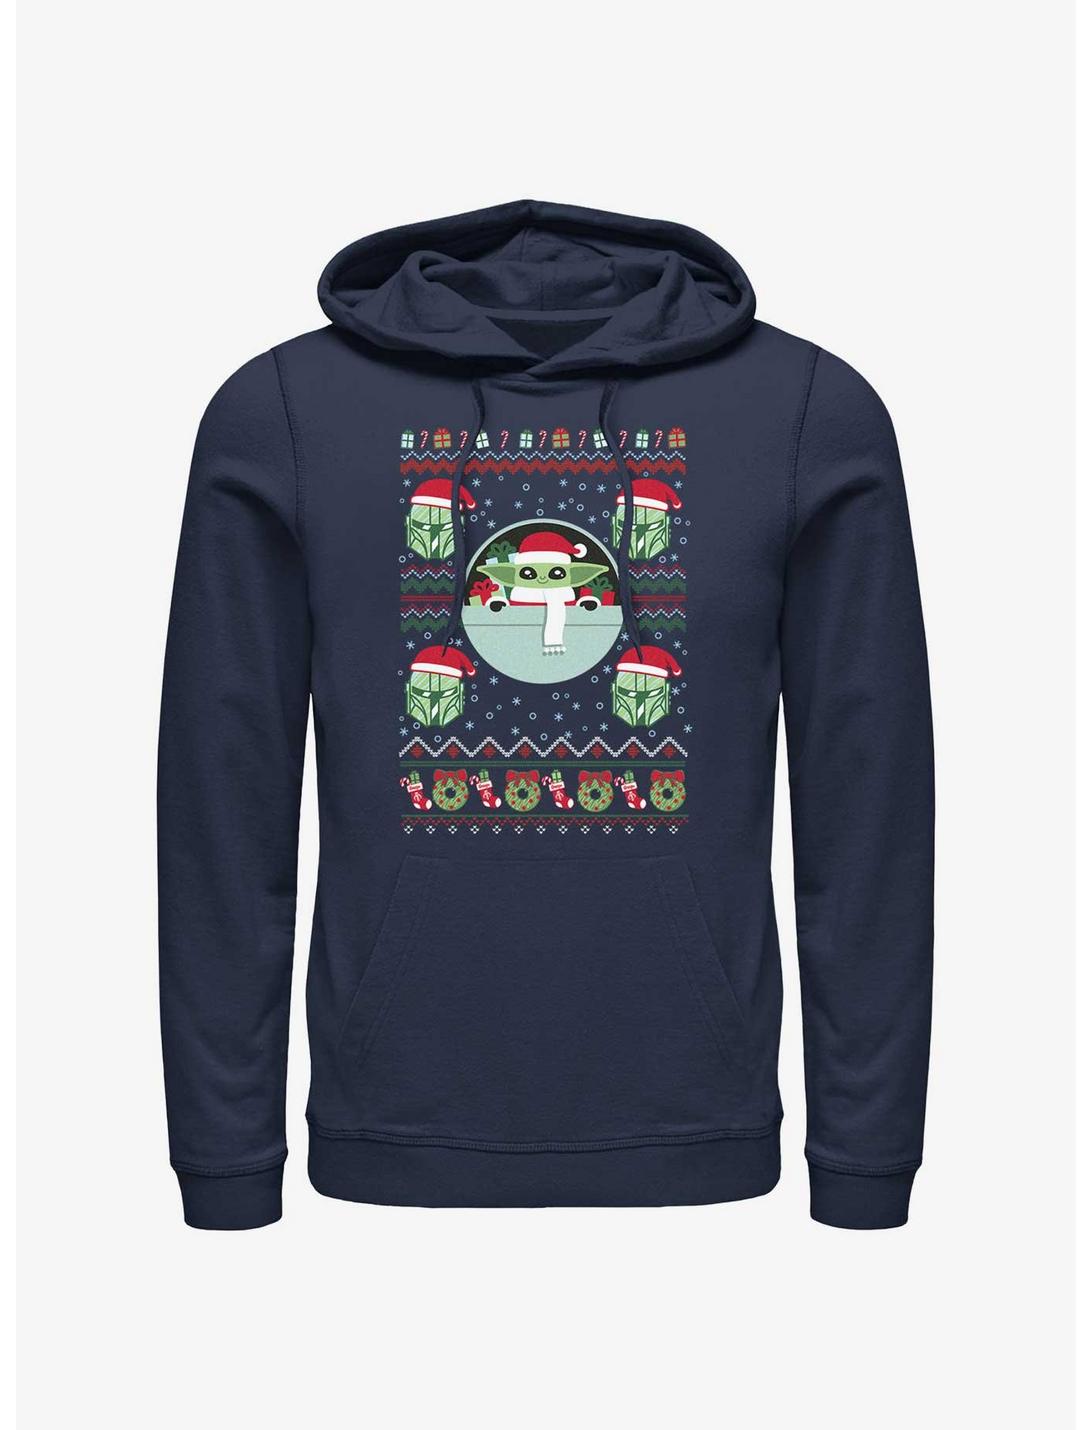 Star Wars The Mandalorian The Child Ugly Christmas Pattern Hoodie, NAVY, hi-res